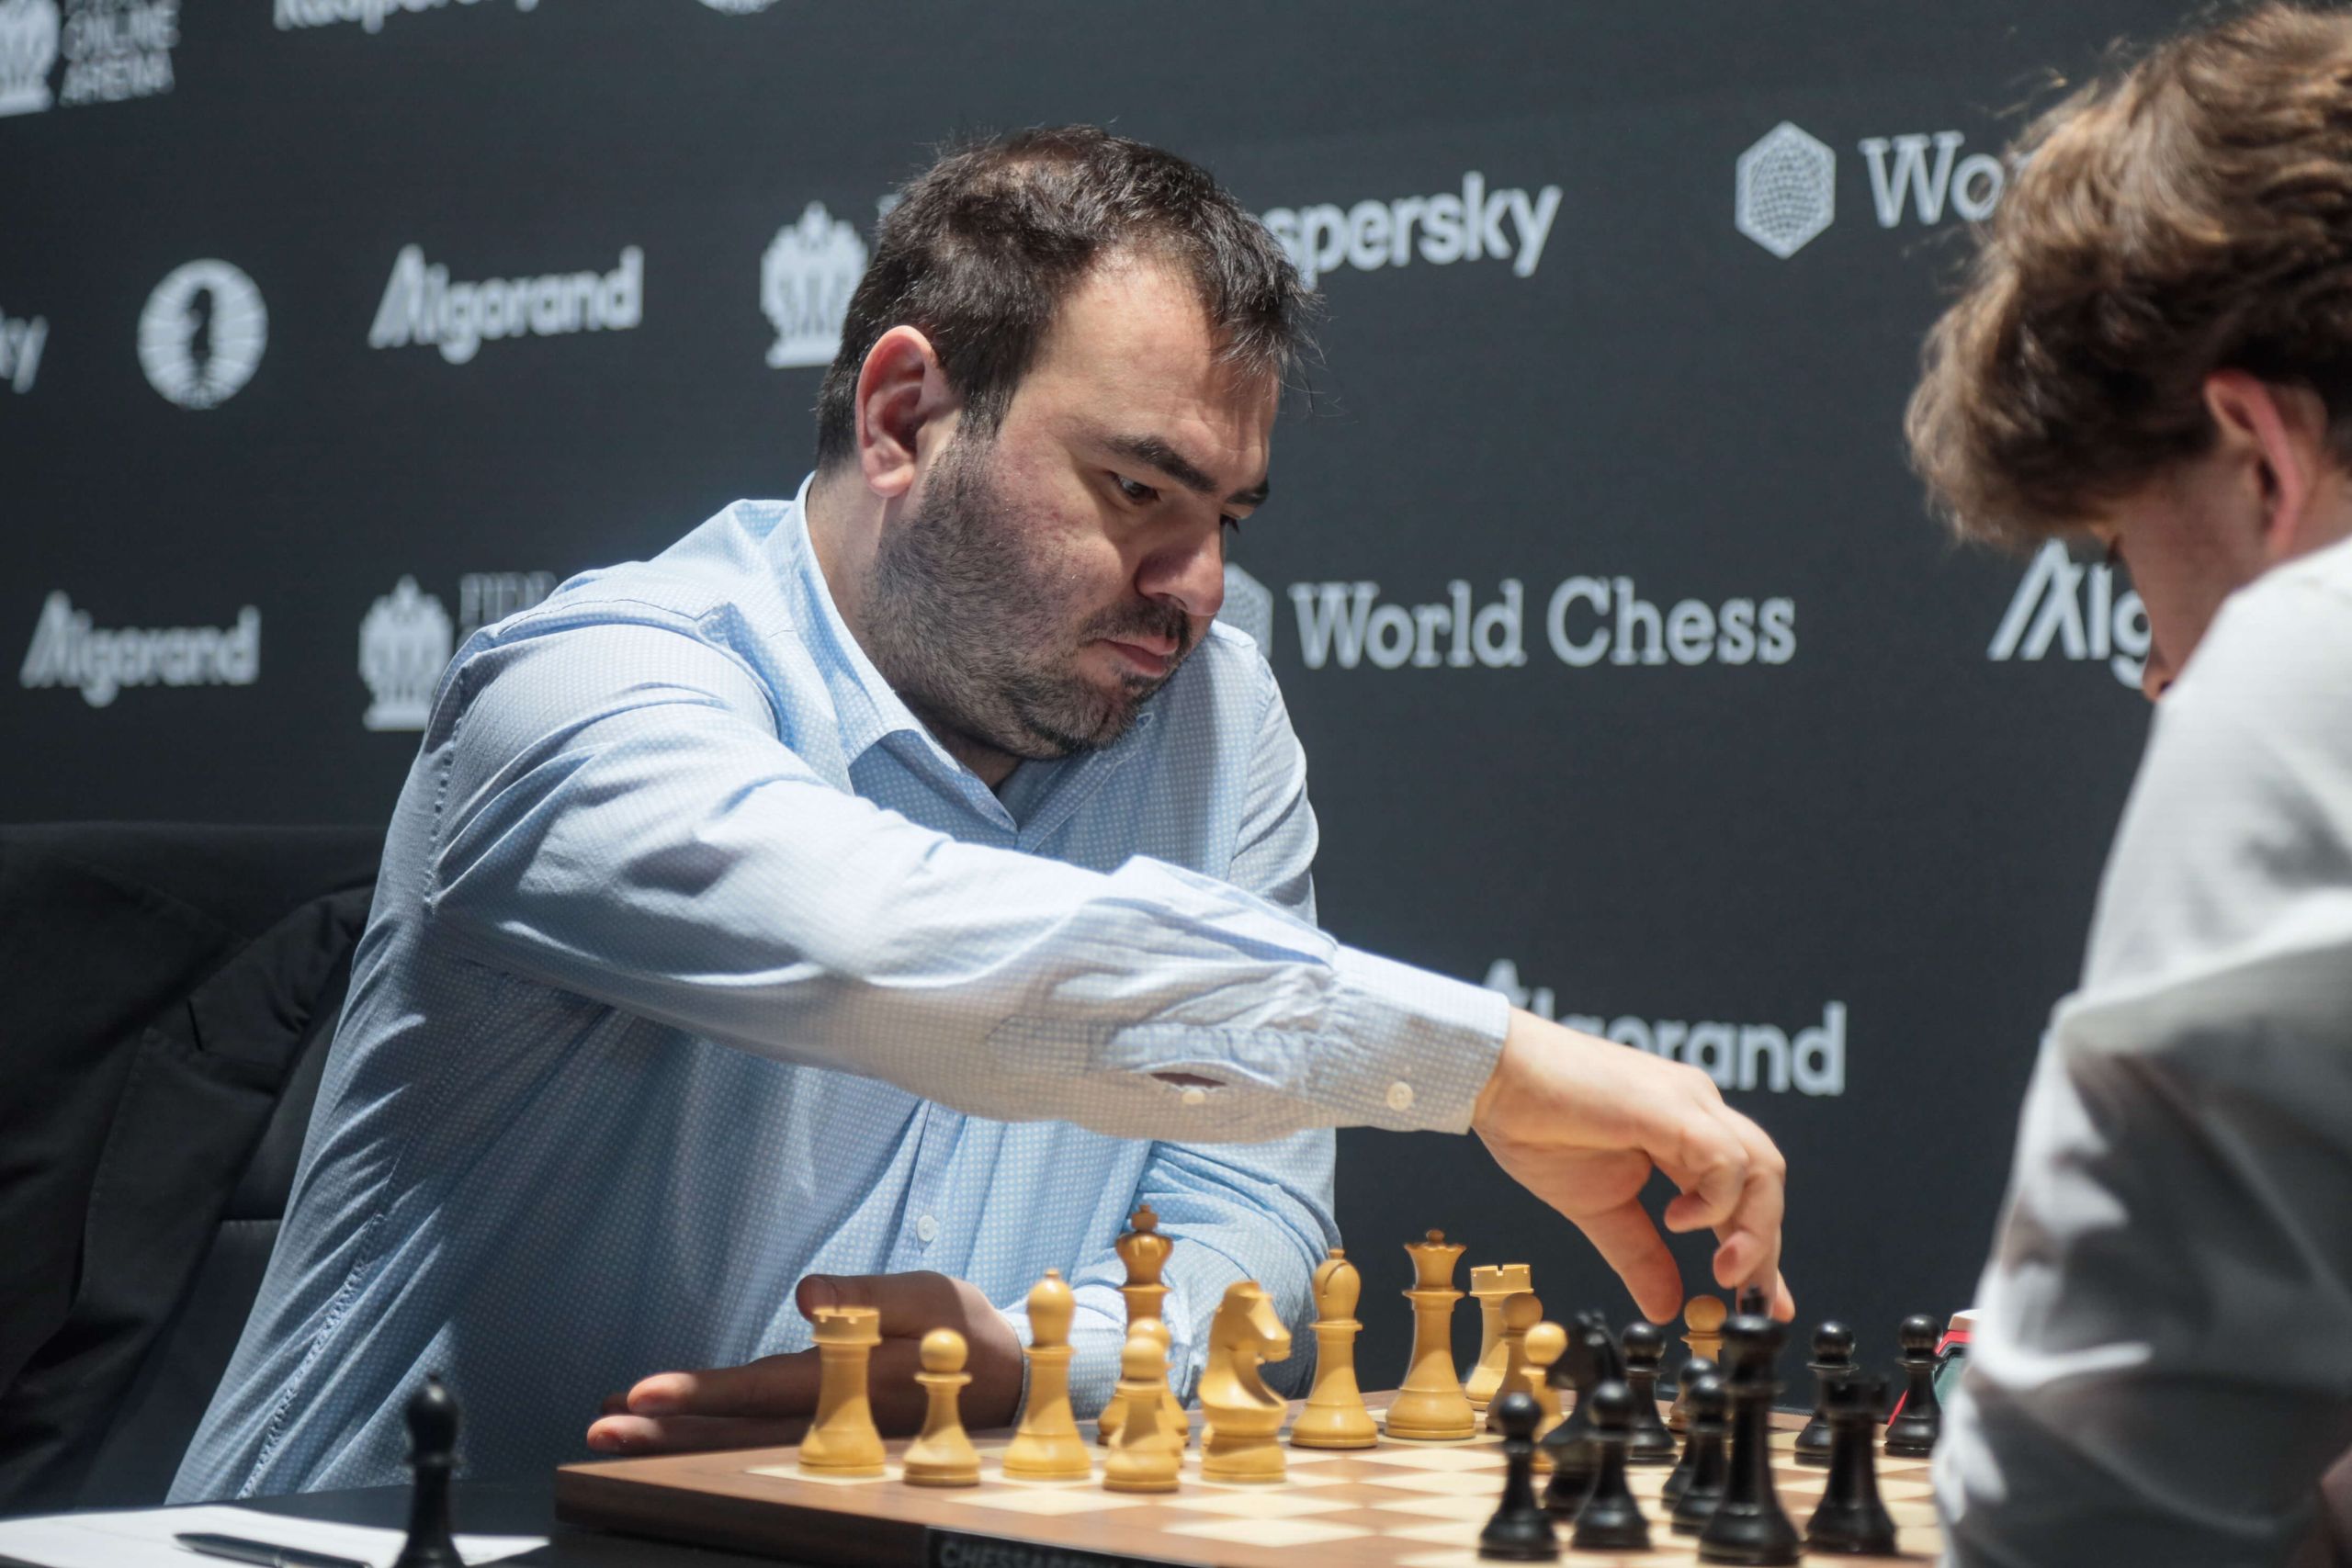 Nakamura bounces back in the match with Carlsen whereas Dubov makes to to  the final